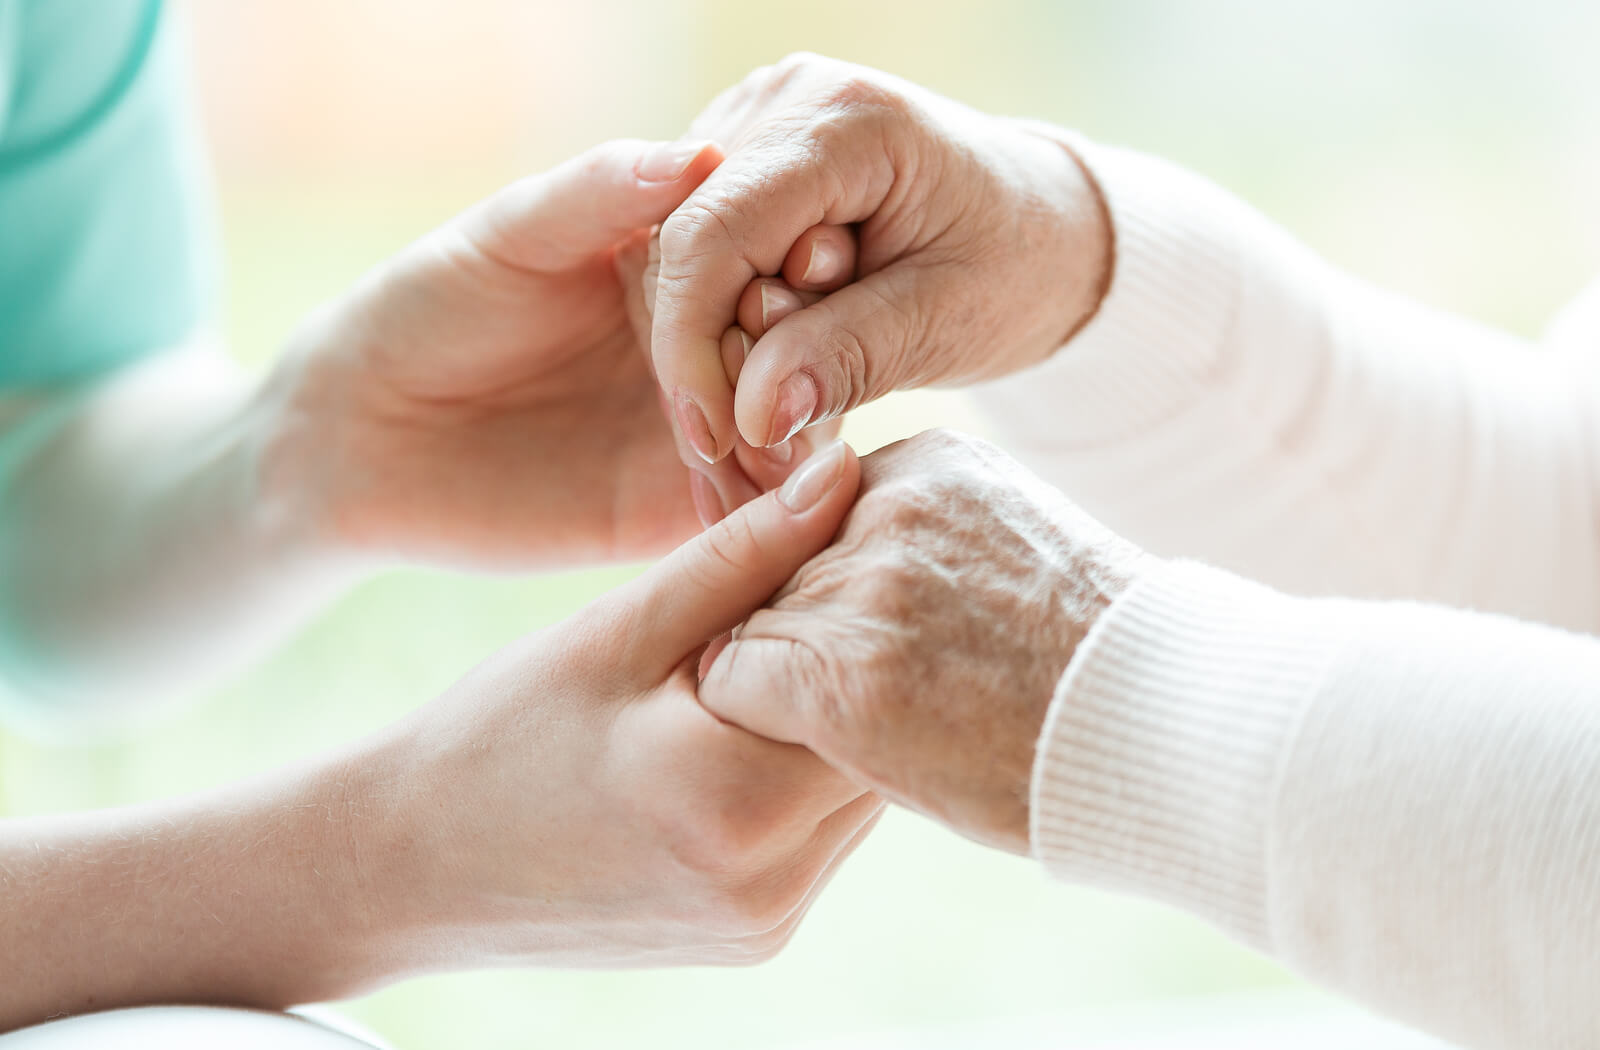 a close up photo of a young person holding the hands of a senior in support